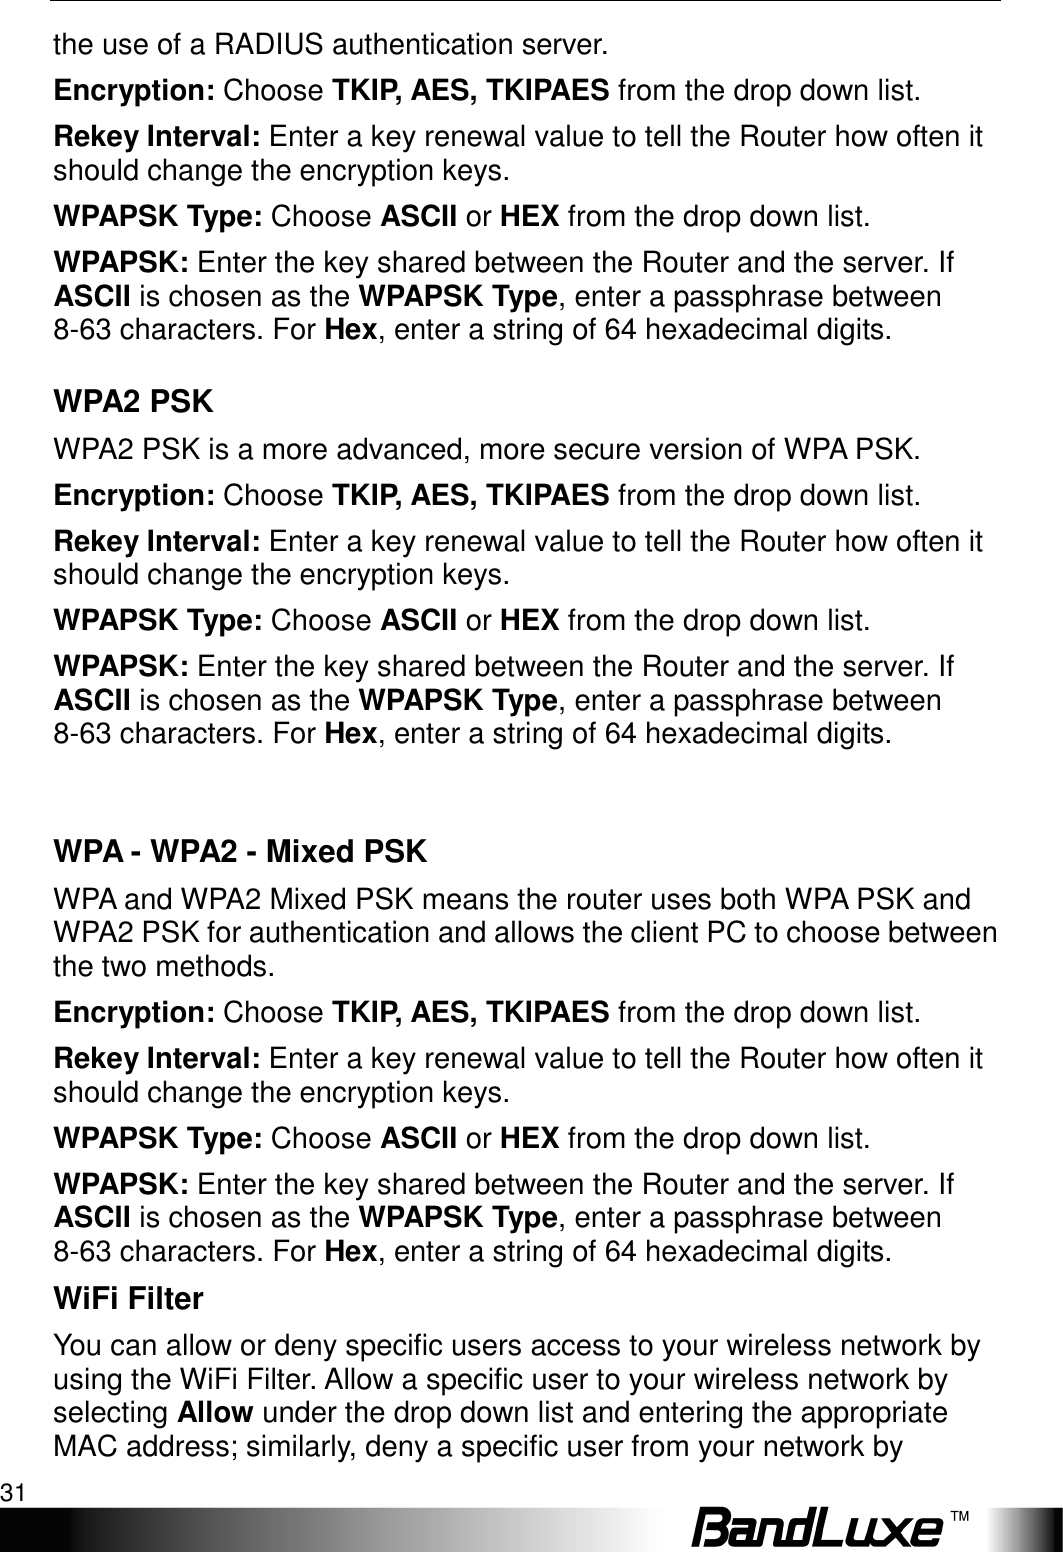   WiFi Setup 31 the use of a RADIUS authentication server. Encryption: Choose TKIP, AES, TKIPAES from the drop down list. Rekey Interval: Enter a key renewal value to tell the Router how often it should change the encryption keys.   WPAPSK Type: Choose ASCII or HEX from the drop down list. WPAPSK: Enter the key shared between the Router and the server. If ASCII is chosen as the WPAPSK Type, enter a passphrase between 8-63 characters. For Hex, enter a string of 64 hexadecimal digits. WPA2 PSK WPA2 PSK is a more advanced, more secure version of WPA PSK. Encryption: Choose TKIP, AES, TKIPAES from the drop down list. Rekey Interval: Enter a key renewal value to tell the Router how often it should change the encryption keys.   WPAPSK Type: Choose ASCII or HEX from the drop down list. WPAPSK: Enter the key shared between the Router and the server. If ASCII is chosen as the WPAPSK Type, enter a passphrase between 8-63 characters. For Hex, enter a string of 64 hexadecimal digits.  WPA - WPA2 - Mixed PSK WPA and WPA2 Mixed PSK means the router uses both WPA PSK and WPA2 PSK for authentication and allows the client PC to choose between the two methods.   Encryption: Choose TKIP, AES, TKIPAES from the drop down list. Rekey Interval: Enter a key renewal value to tell the Router how often it should change the encryption keys.   WPAPSK Type: Choose ASCII or HEX from the drop down list. WPAPSK: Enter the key shared between the Router and the server. If ASCII is chosen as the WPAPSK Type, enter a passphrase between 8-63 characters. For Hex, enter a string of 64 hexadecimal digits. WiFi Filter You can allow or deny specific users access to your wireless network by using the WiFi Filter. Allow a specific user to your wireless network by selecting Allow under the drop down list and entering the appropriate MAC address; similarly, deny a specific user from your network by 